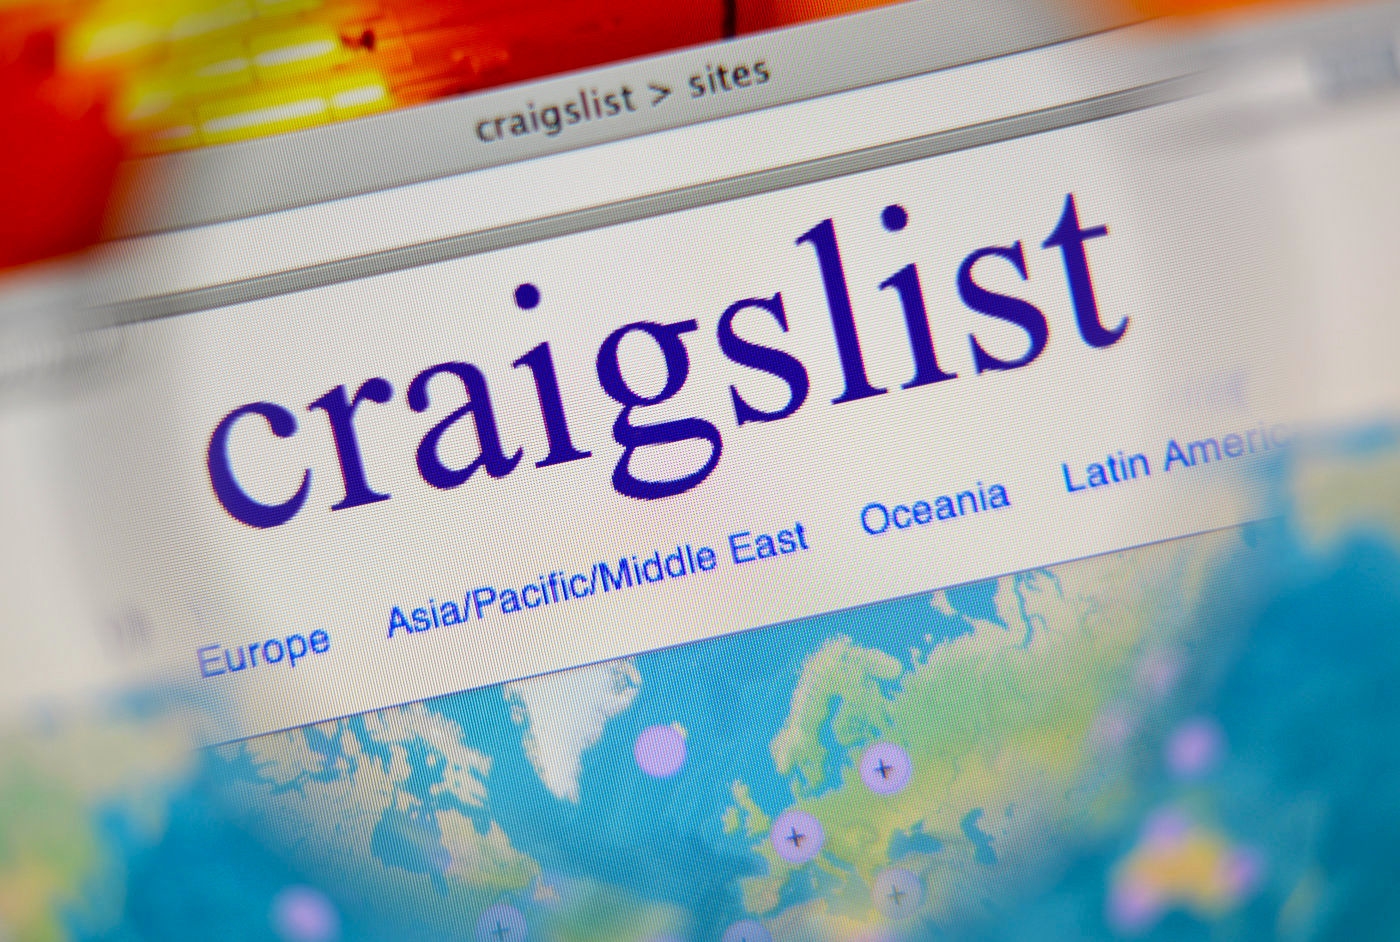 Craiglist blocks personal ads to protest anti sex-trafficking law | DeviceDaily.com